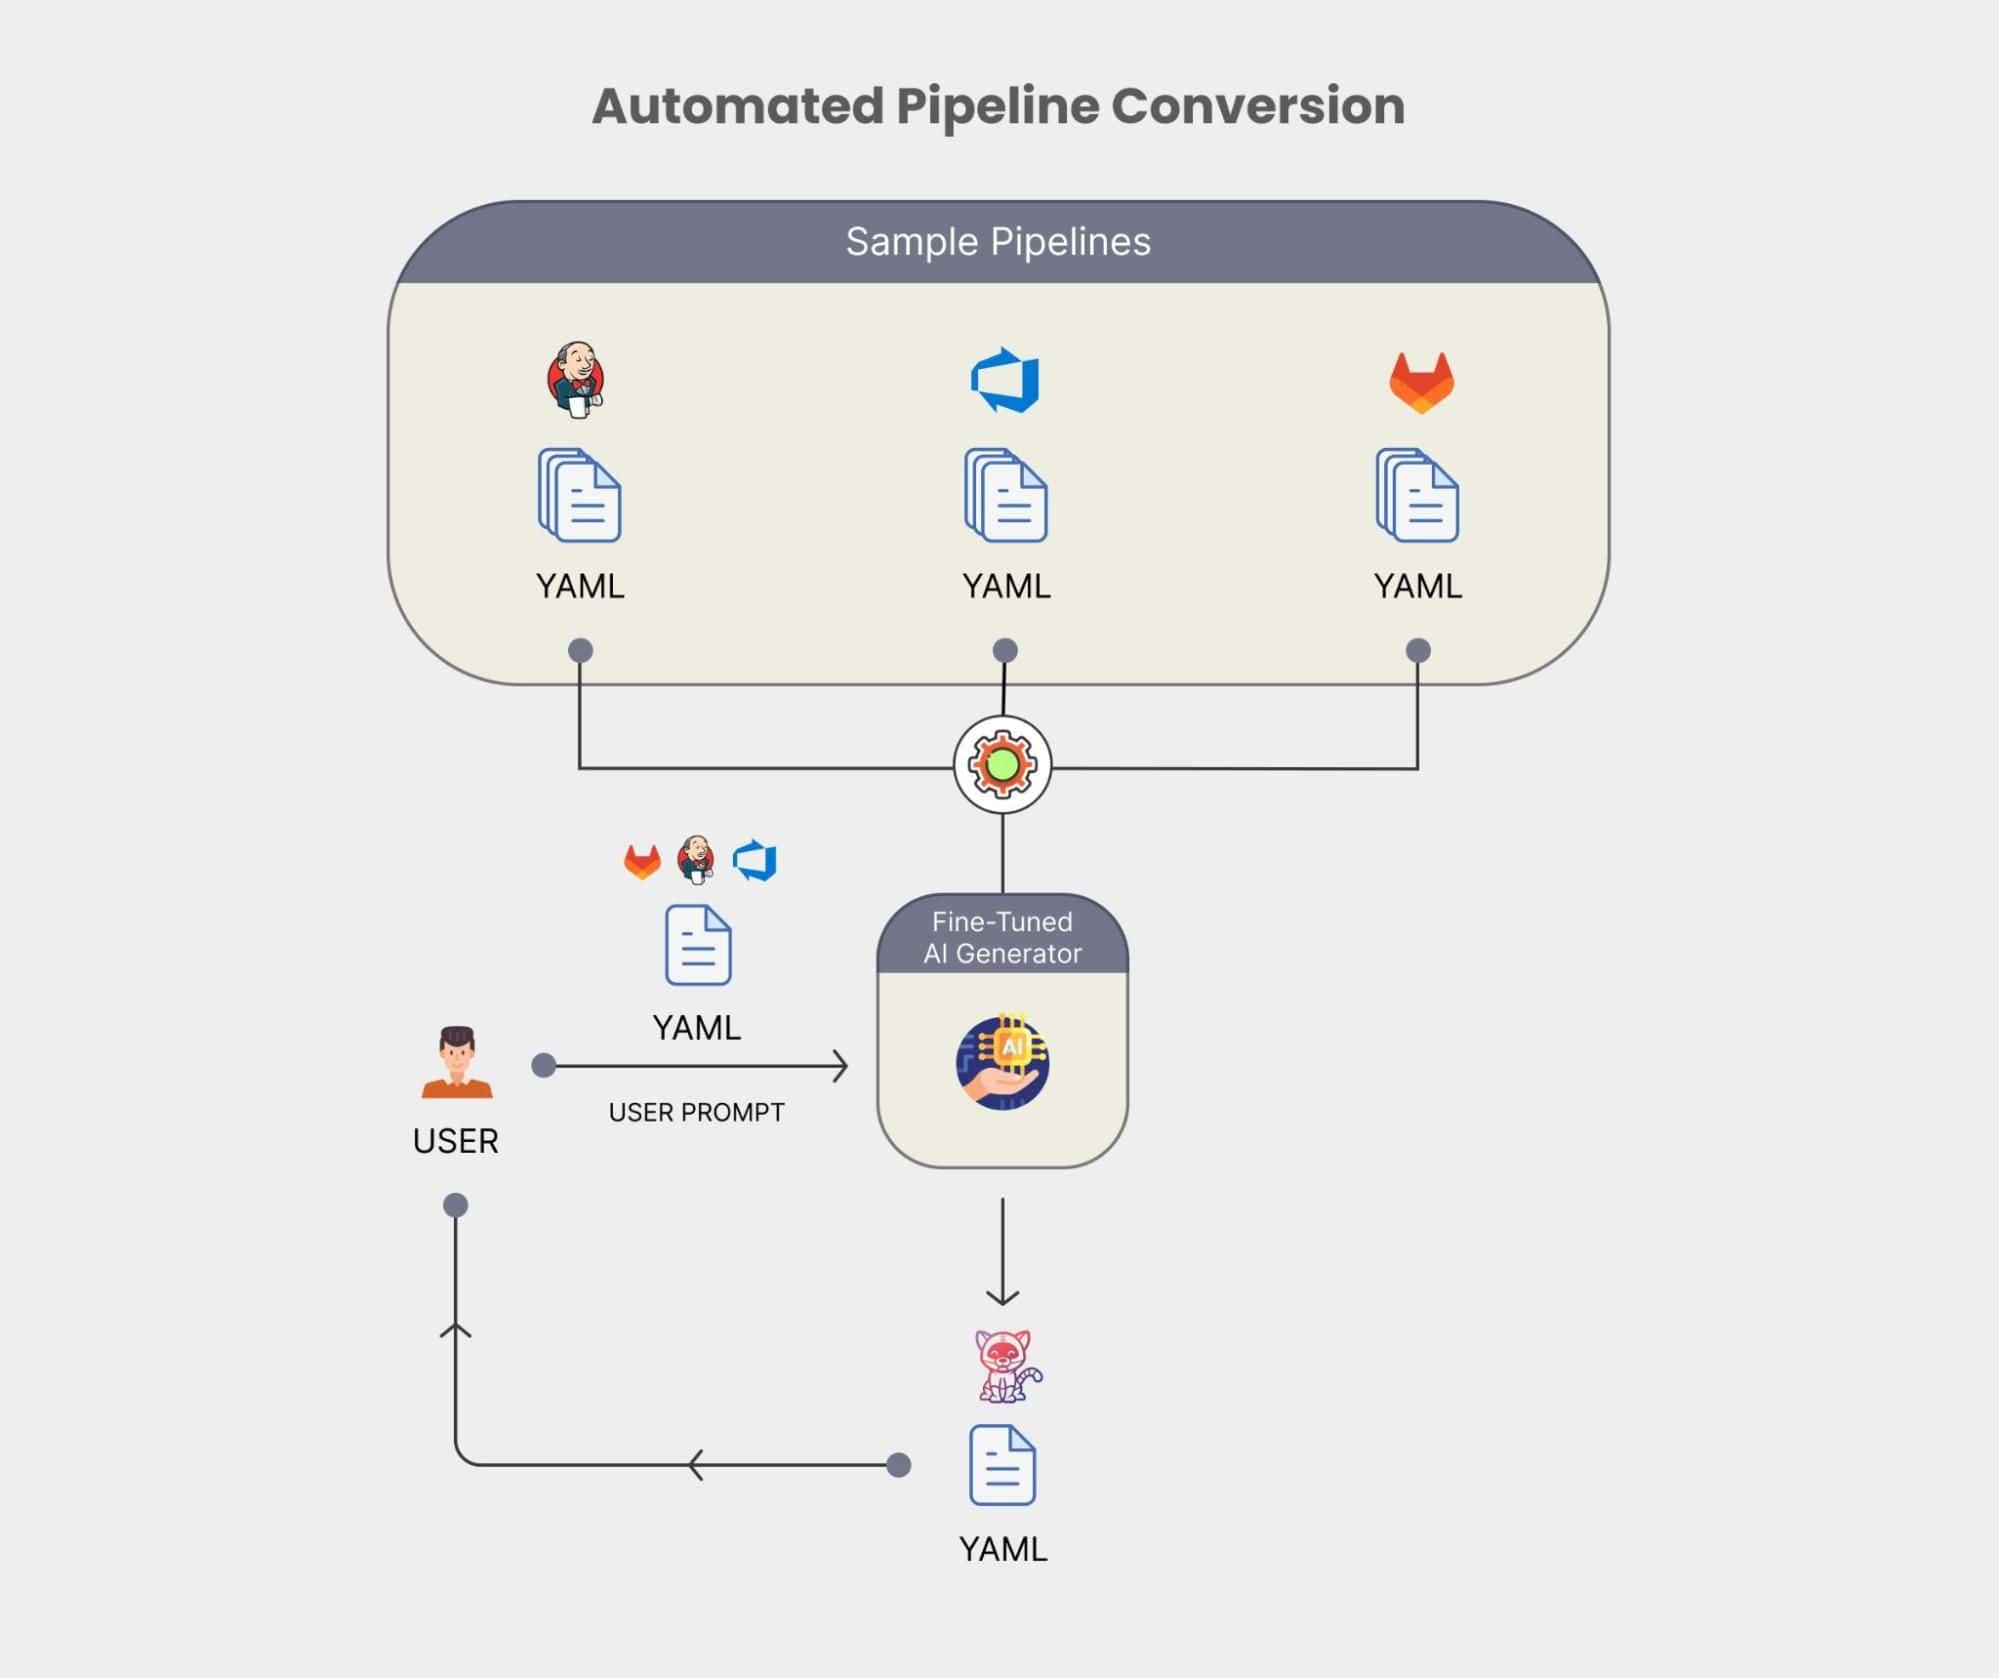 Diagram flow showing automated pipeline conversion